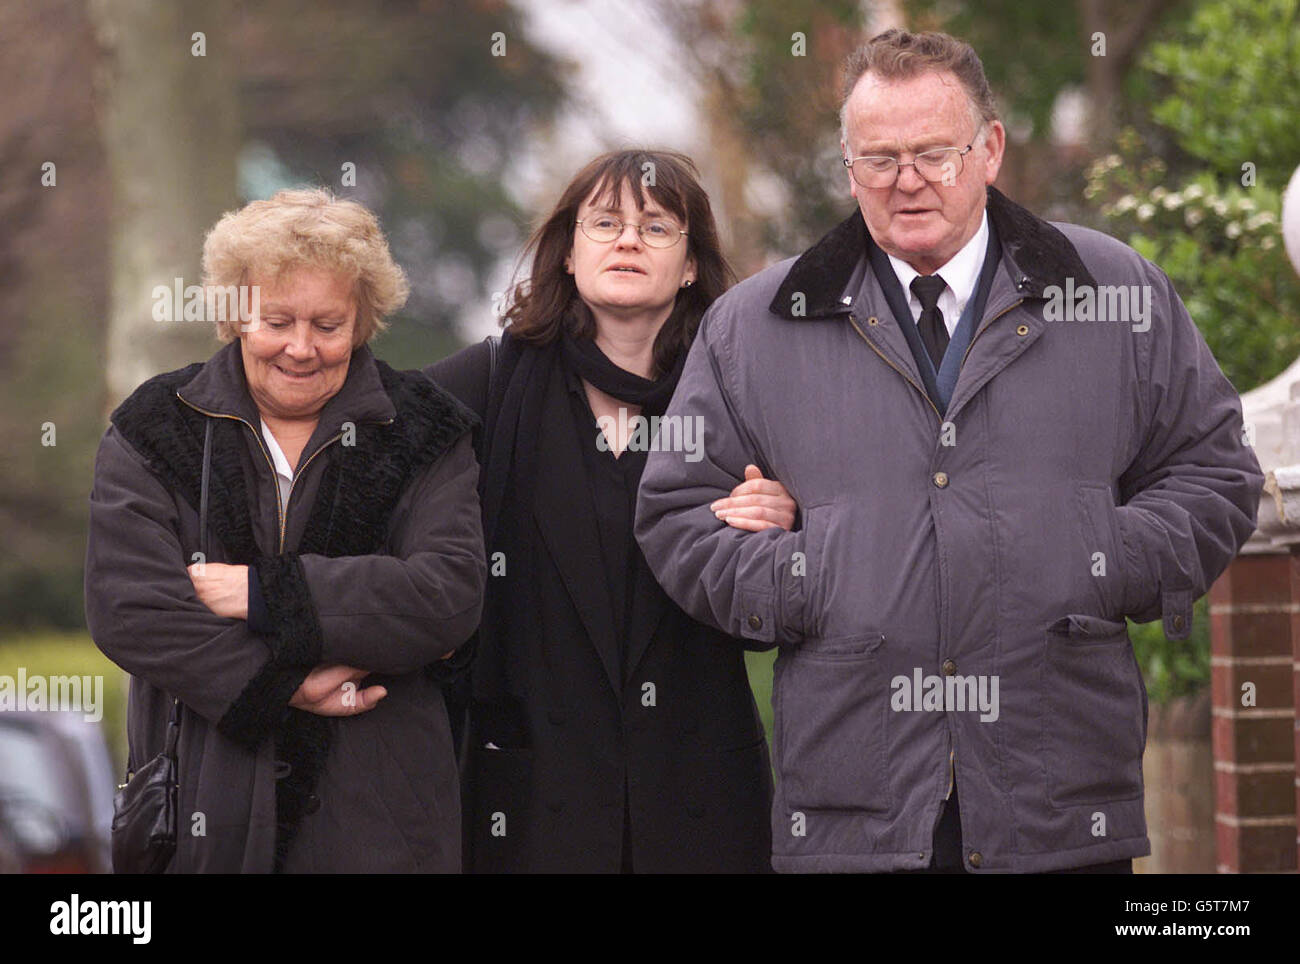 Kenneth and Pauline Cottle and their daughter Mandy (centre), speak outside Eastbourne Coroner's Court, Monday April 15, 2002, after the inquest into the death of their daughter Paula Ramsden ended with an open verdict. *...Mrs Ramsden fell to her death from Beachy Head, East Sussex in January 2000. Her husband Paul claims she slipped as they kissed on the clifftop. Stock Photo